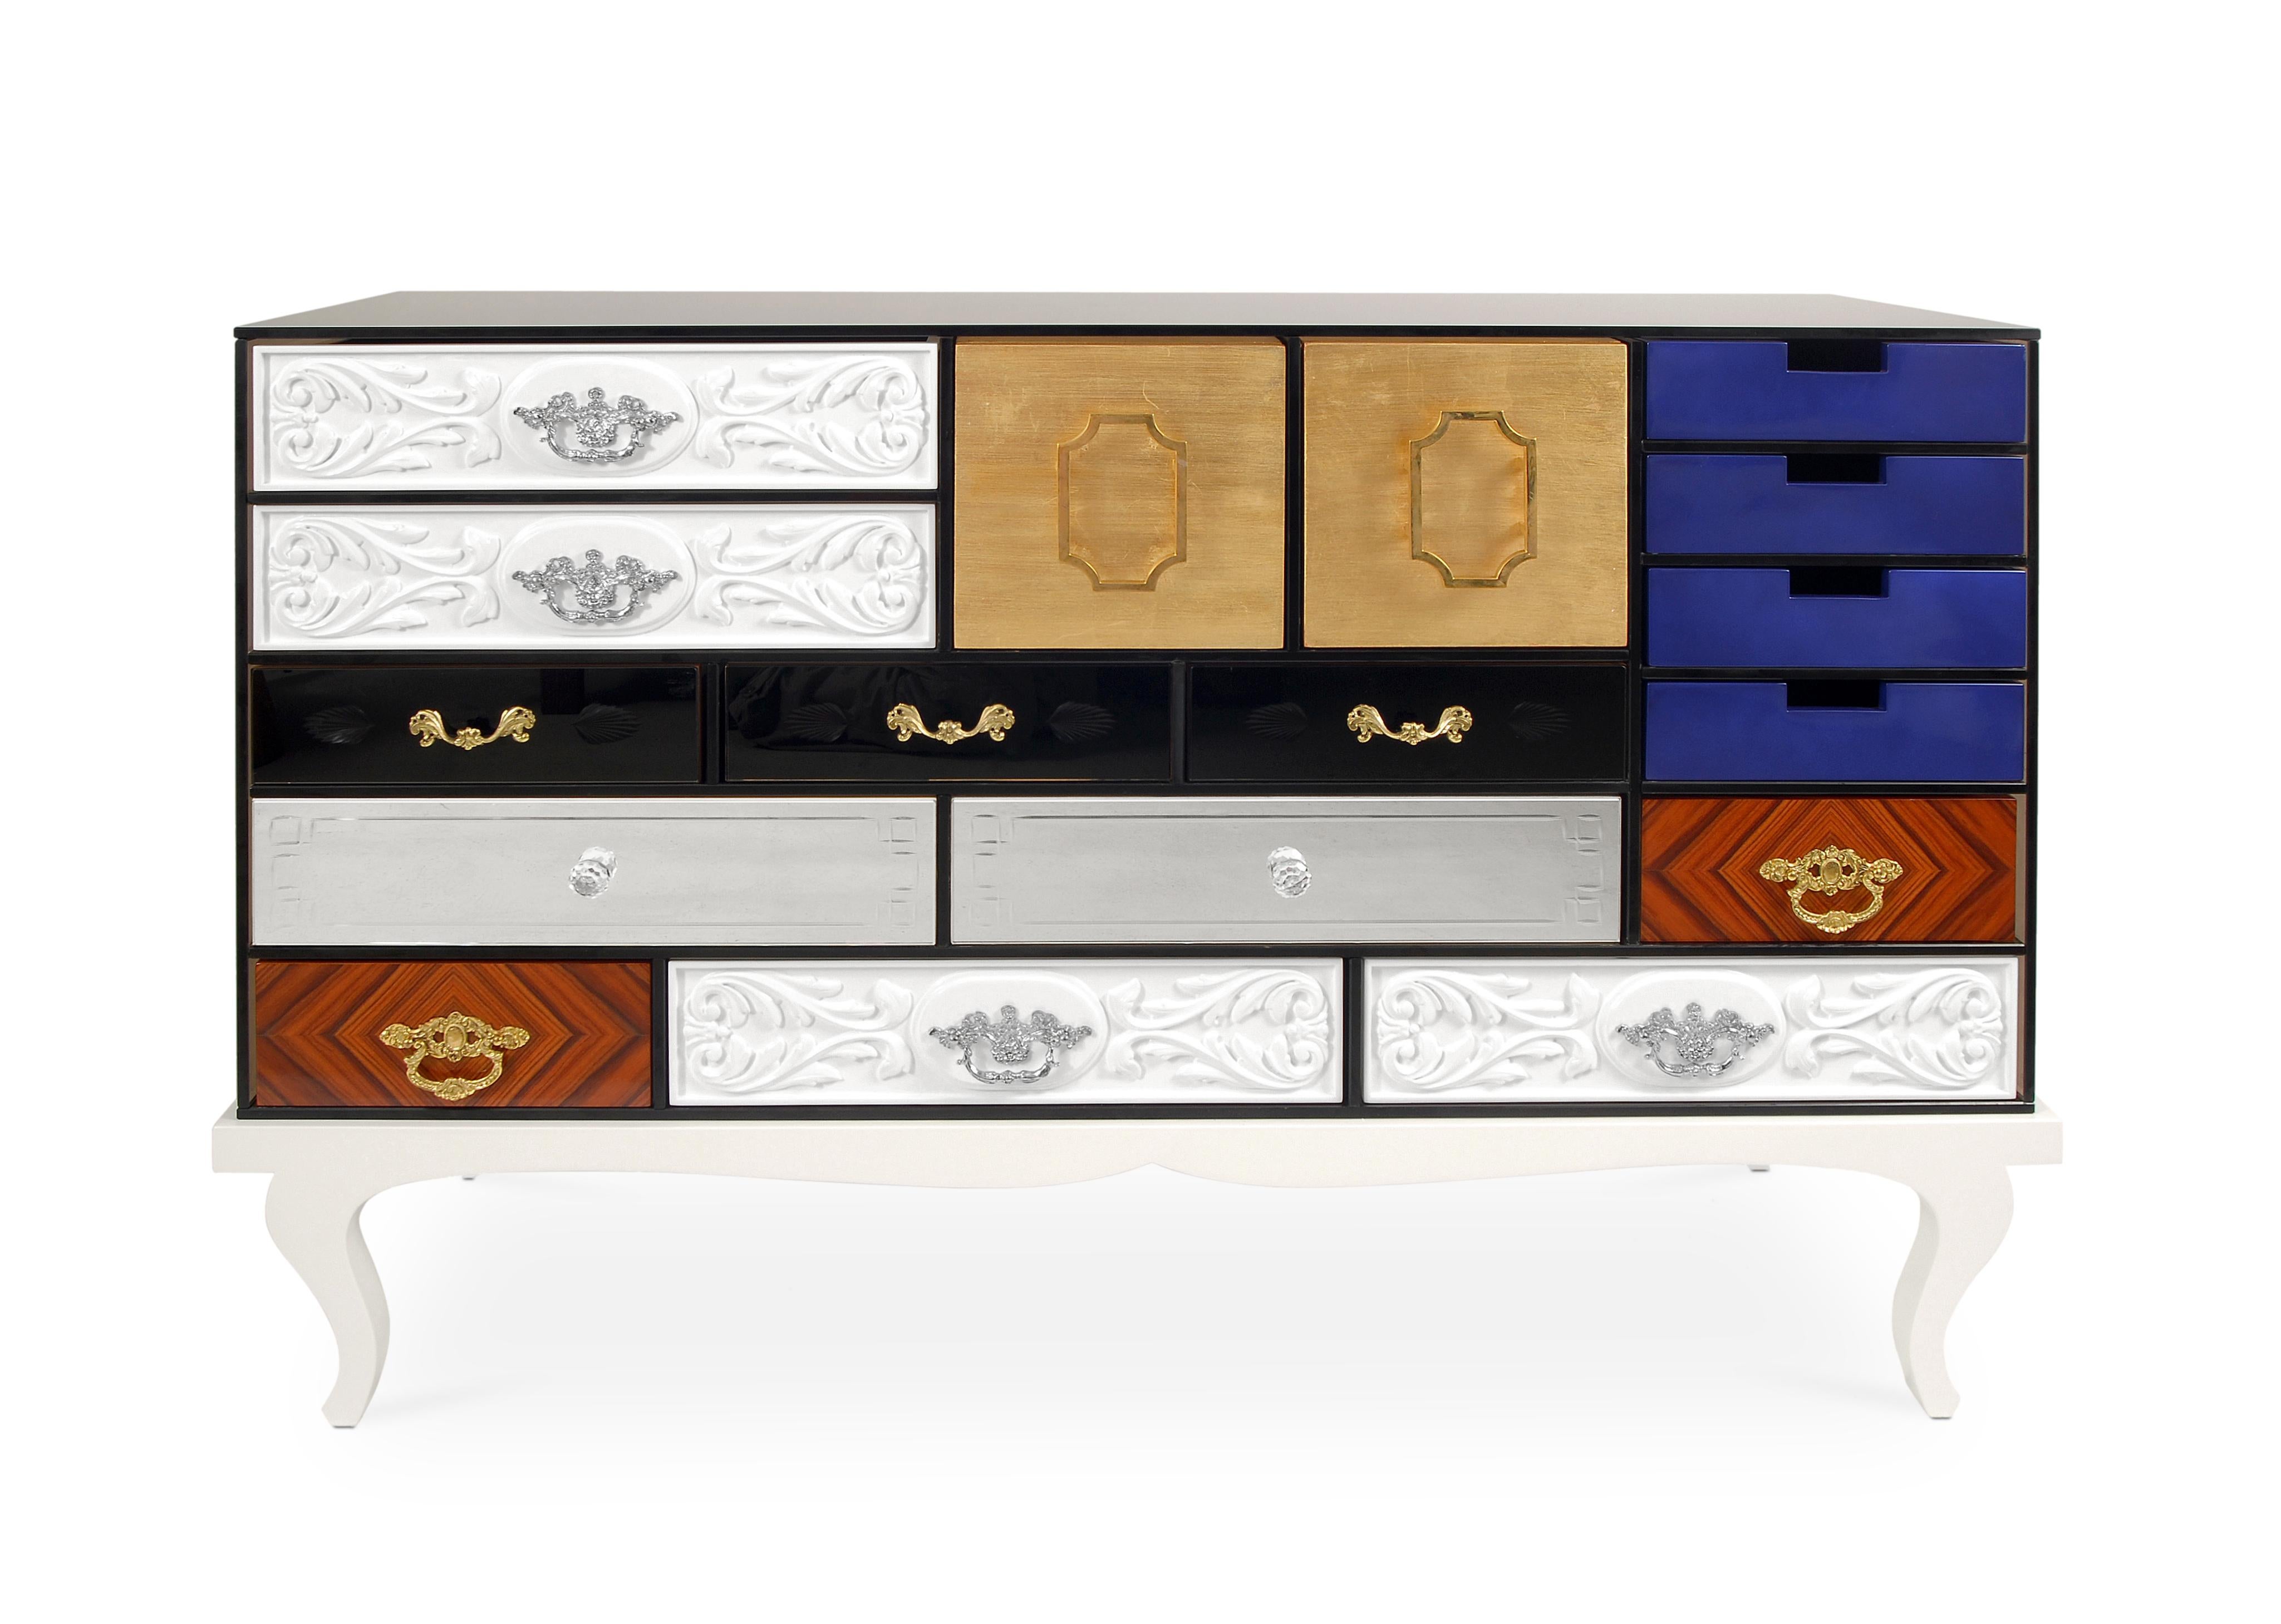 Modern Contemporary Soho Sideboard With Handcrafted Fronts by Boca do Lobo

Modern Contemporary Soho Sideboard With Handcrafted Fronts is involved by an elegant frame of tempered glass. Composed by fifteen drawers and two doors with a series of